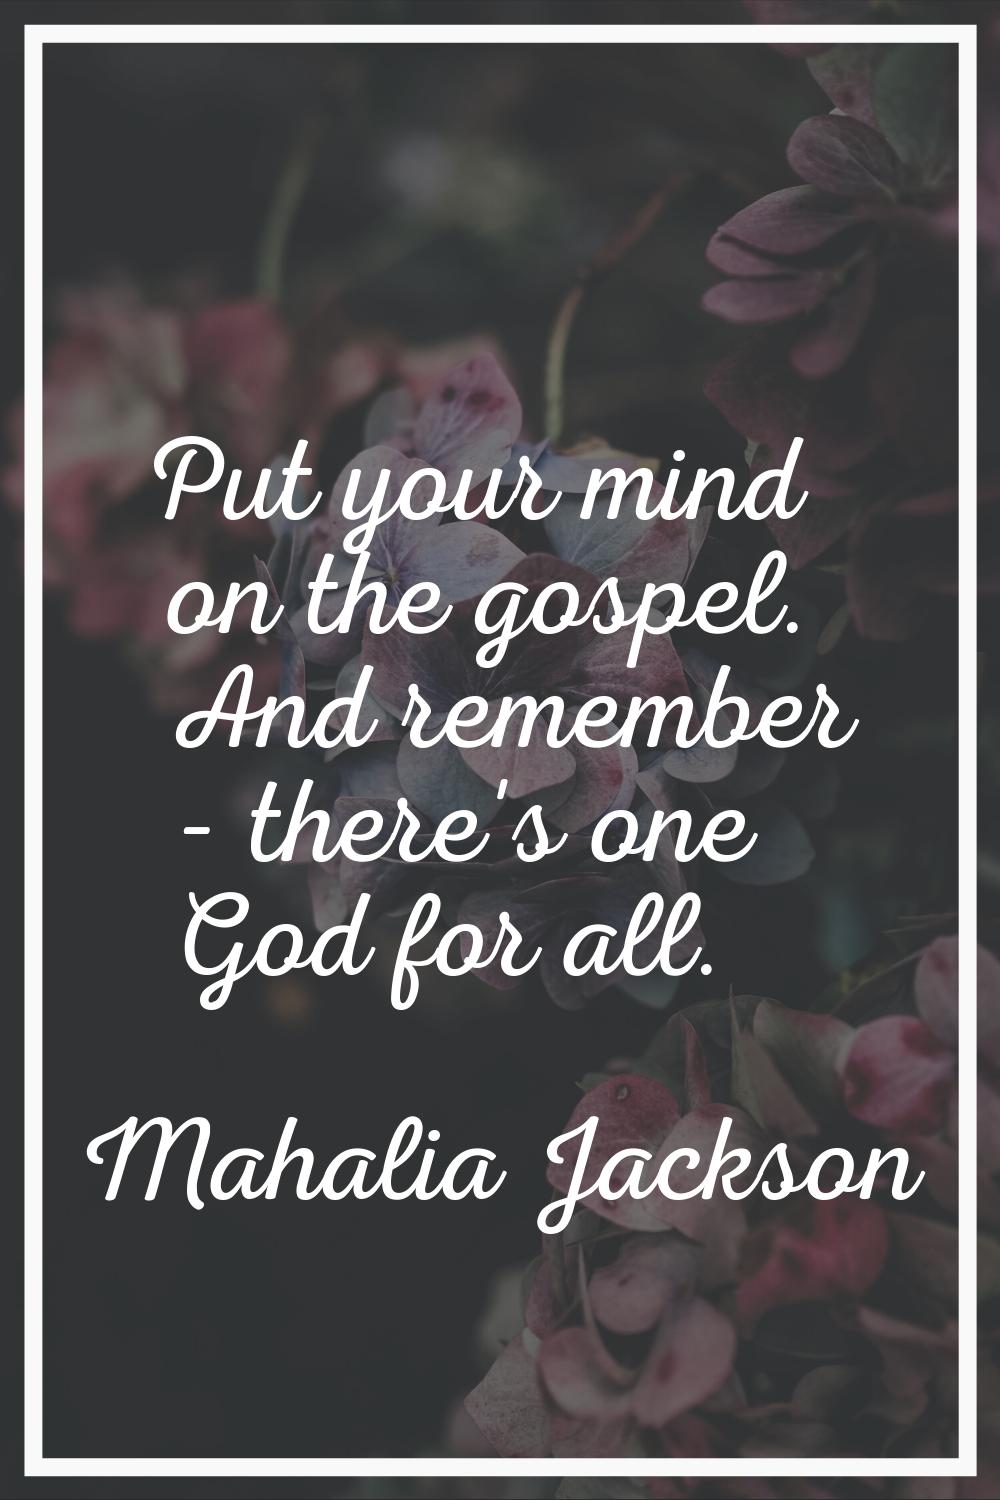 Put your mind on the gospel. And remember - there's one God for all.